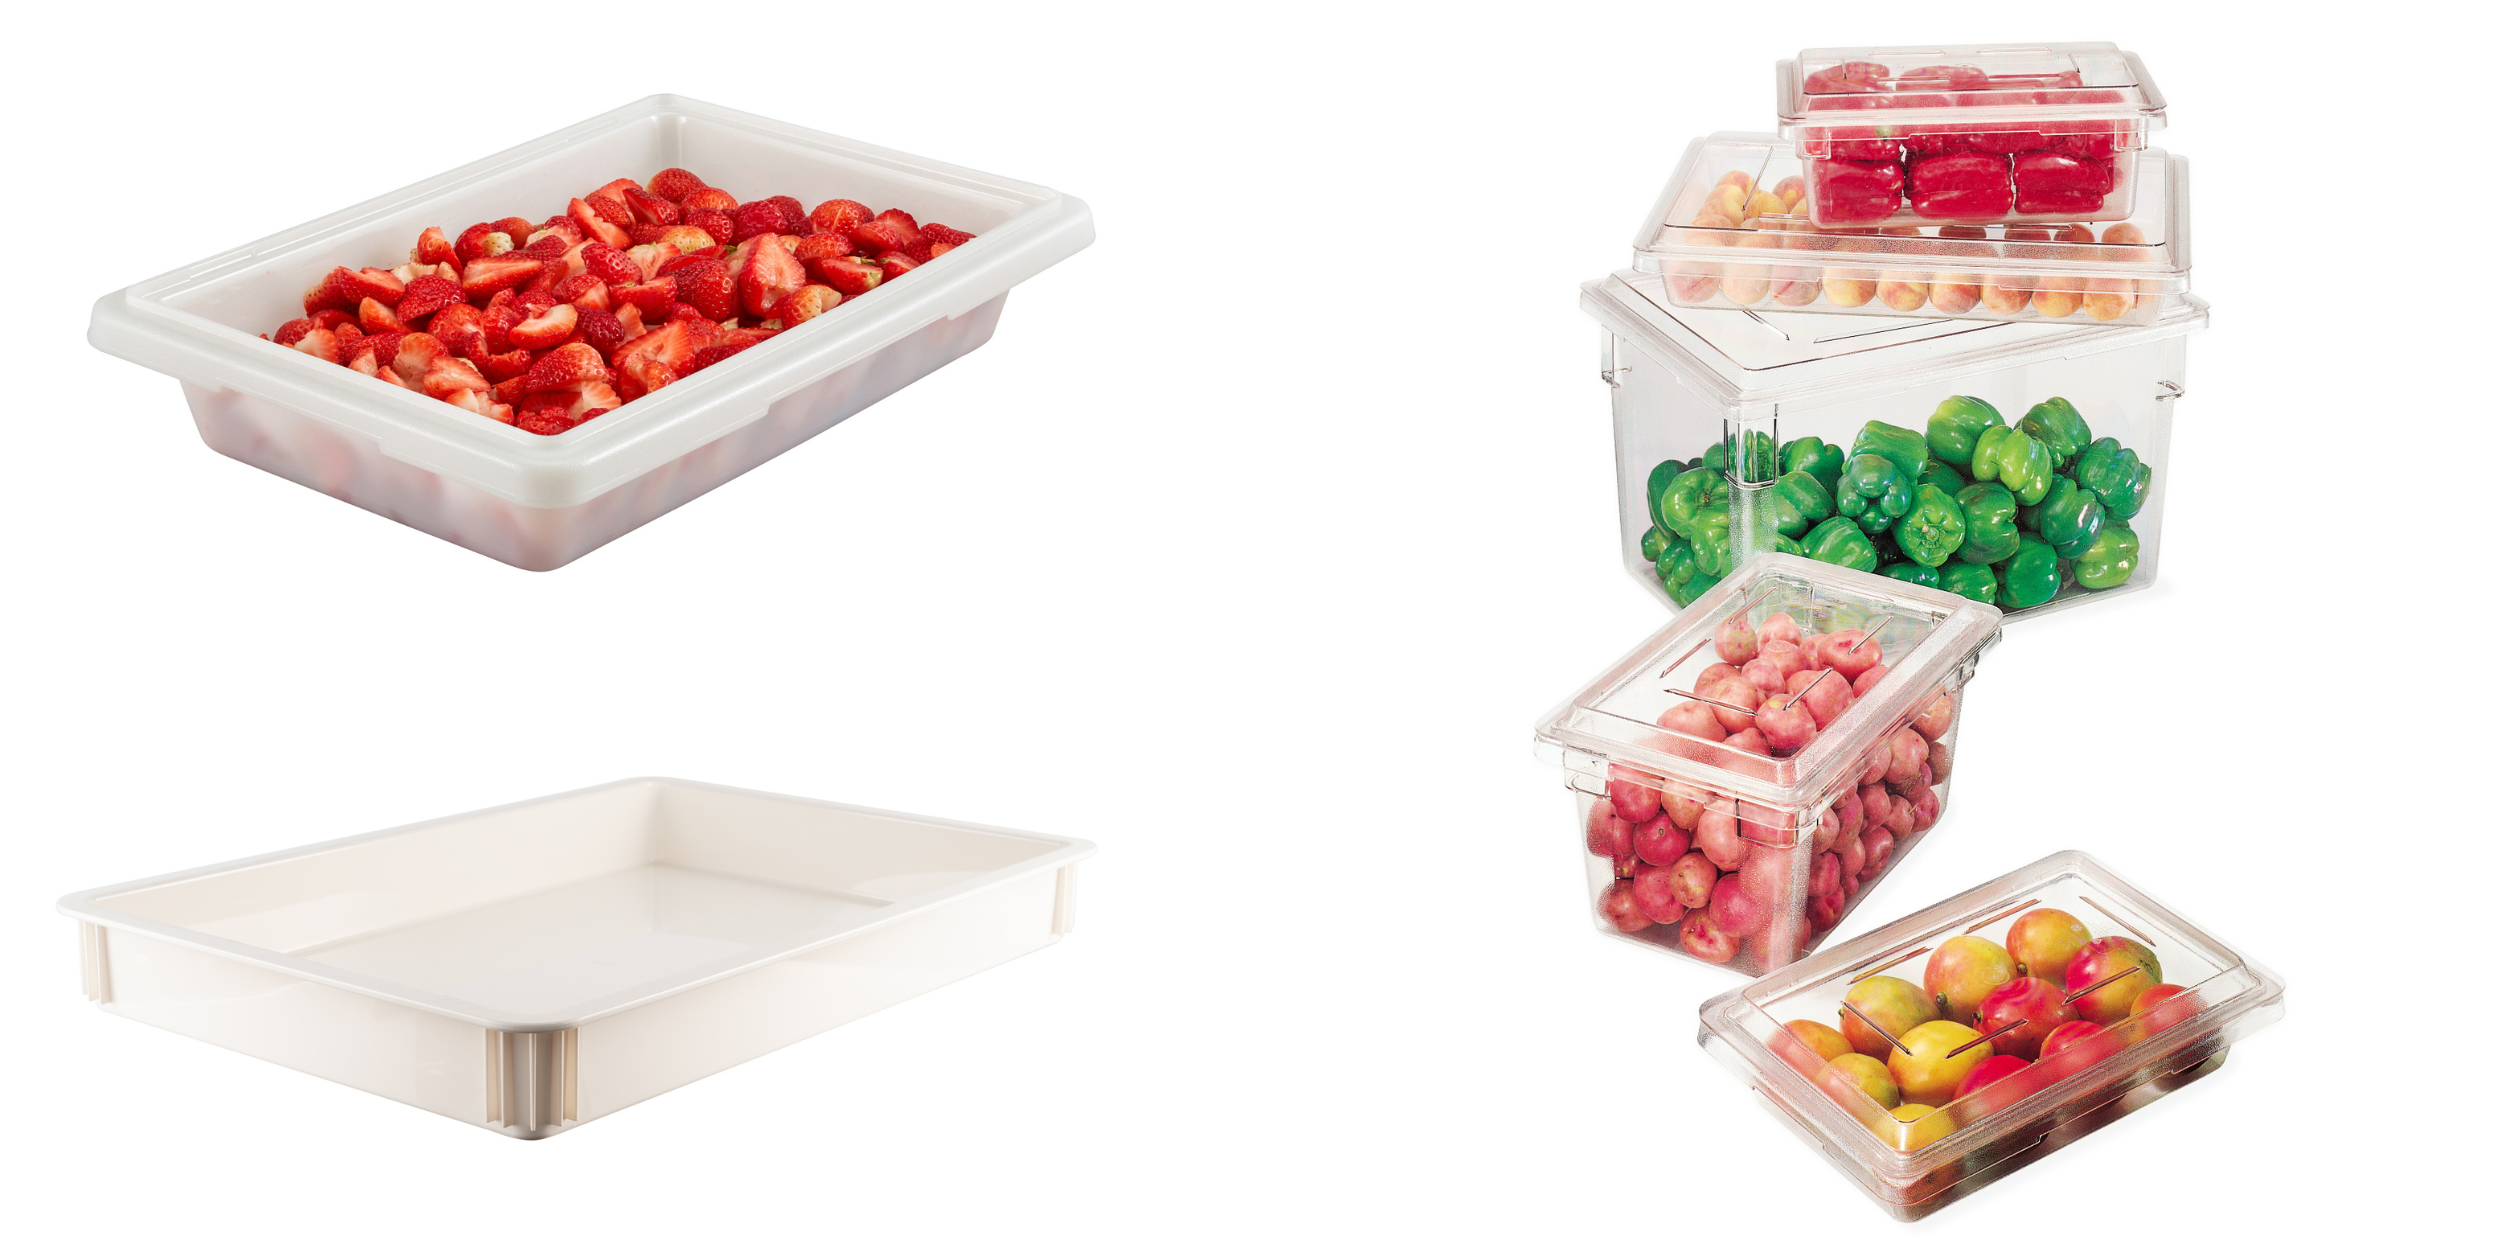 Rectangular food storage containers and boxes